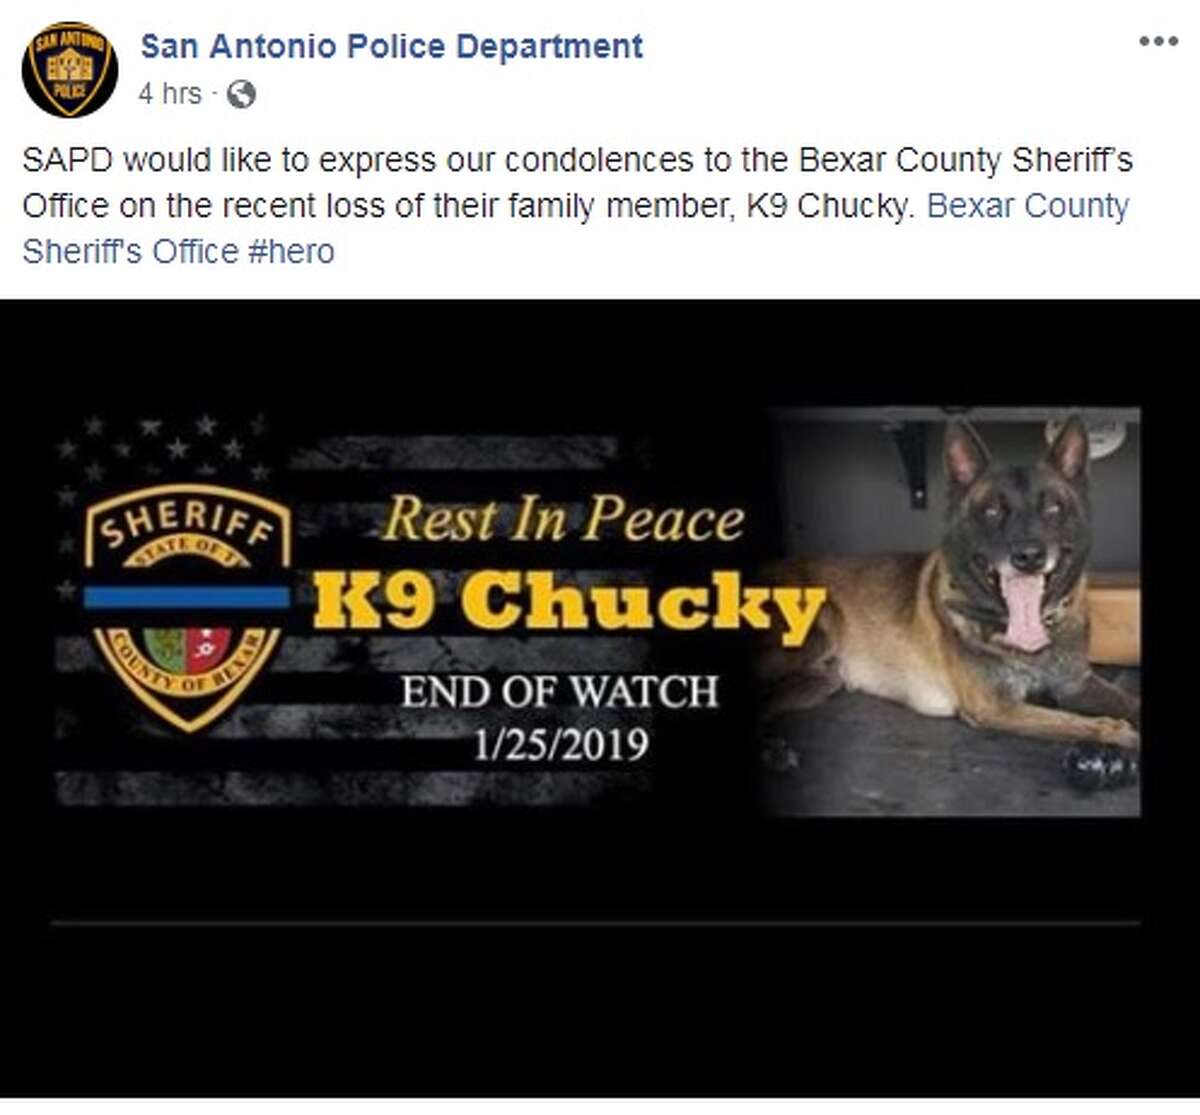 San Antonio Police Department share their thoughts and condolences for the fallen Bexar County Sheriff's Office K9 Chucky.